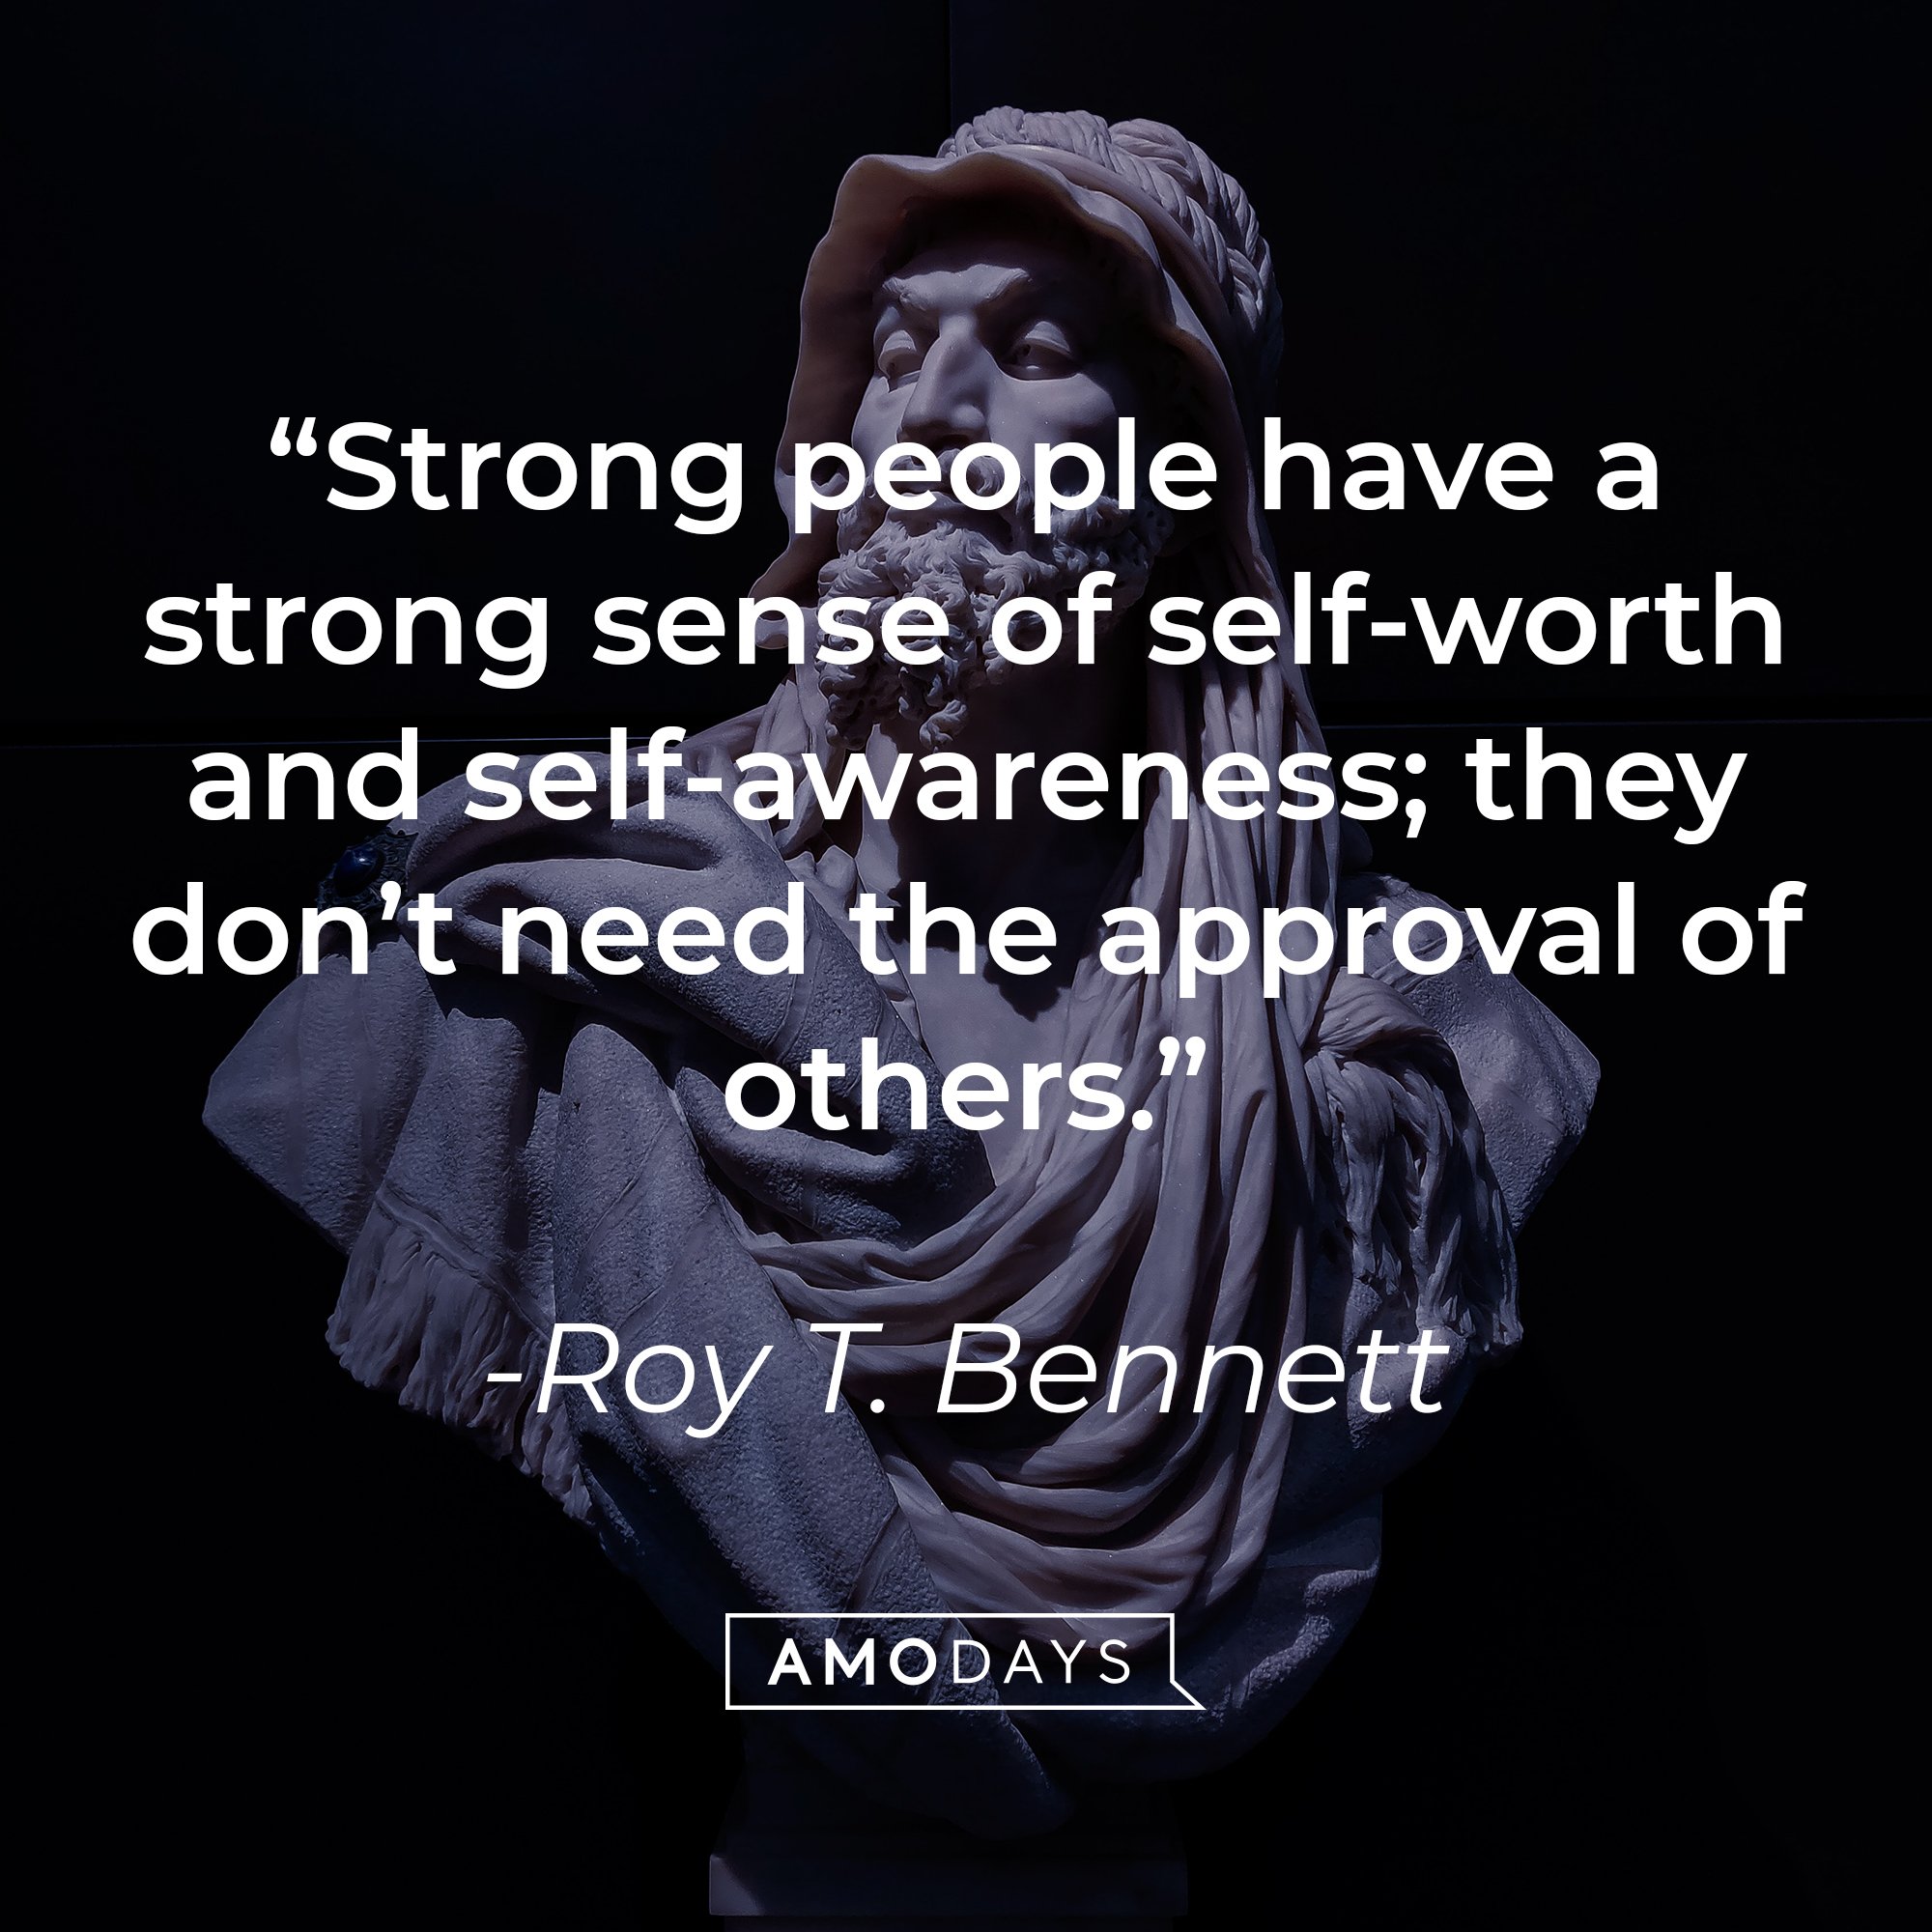  Roy T. Bennett's quote: “Strong people have a strong sense of self-worth and self-awareness; they don’t need the approval of others.” | Image: AmoDays